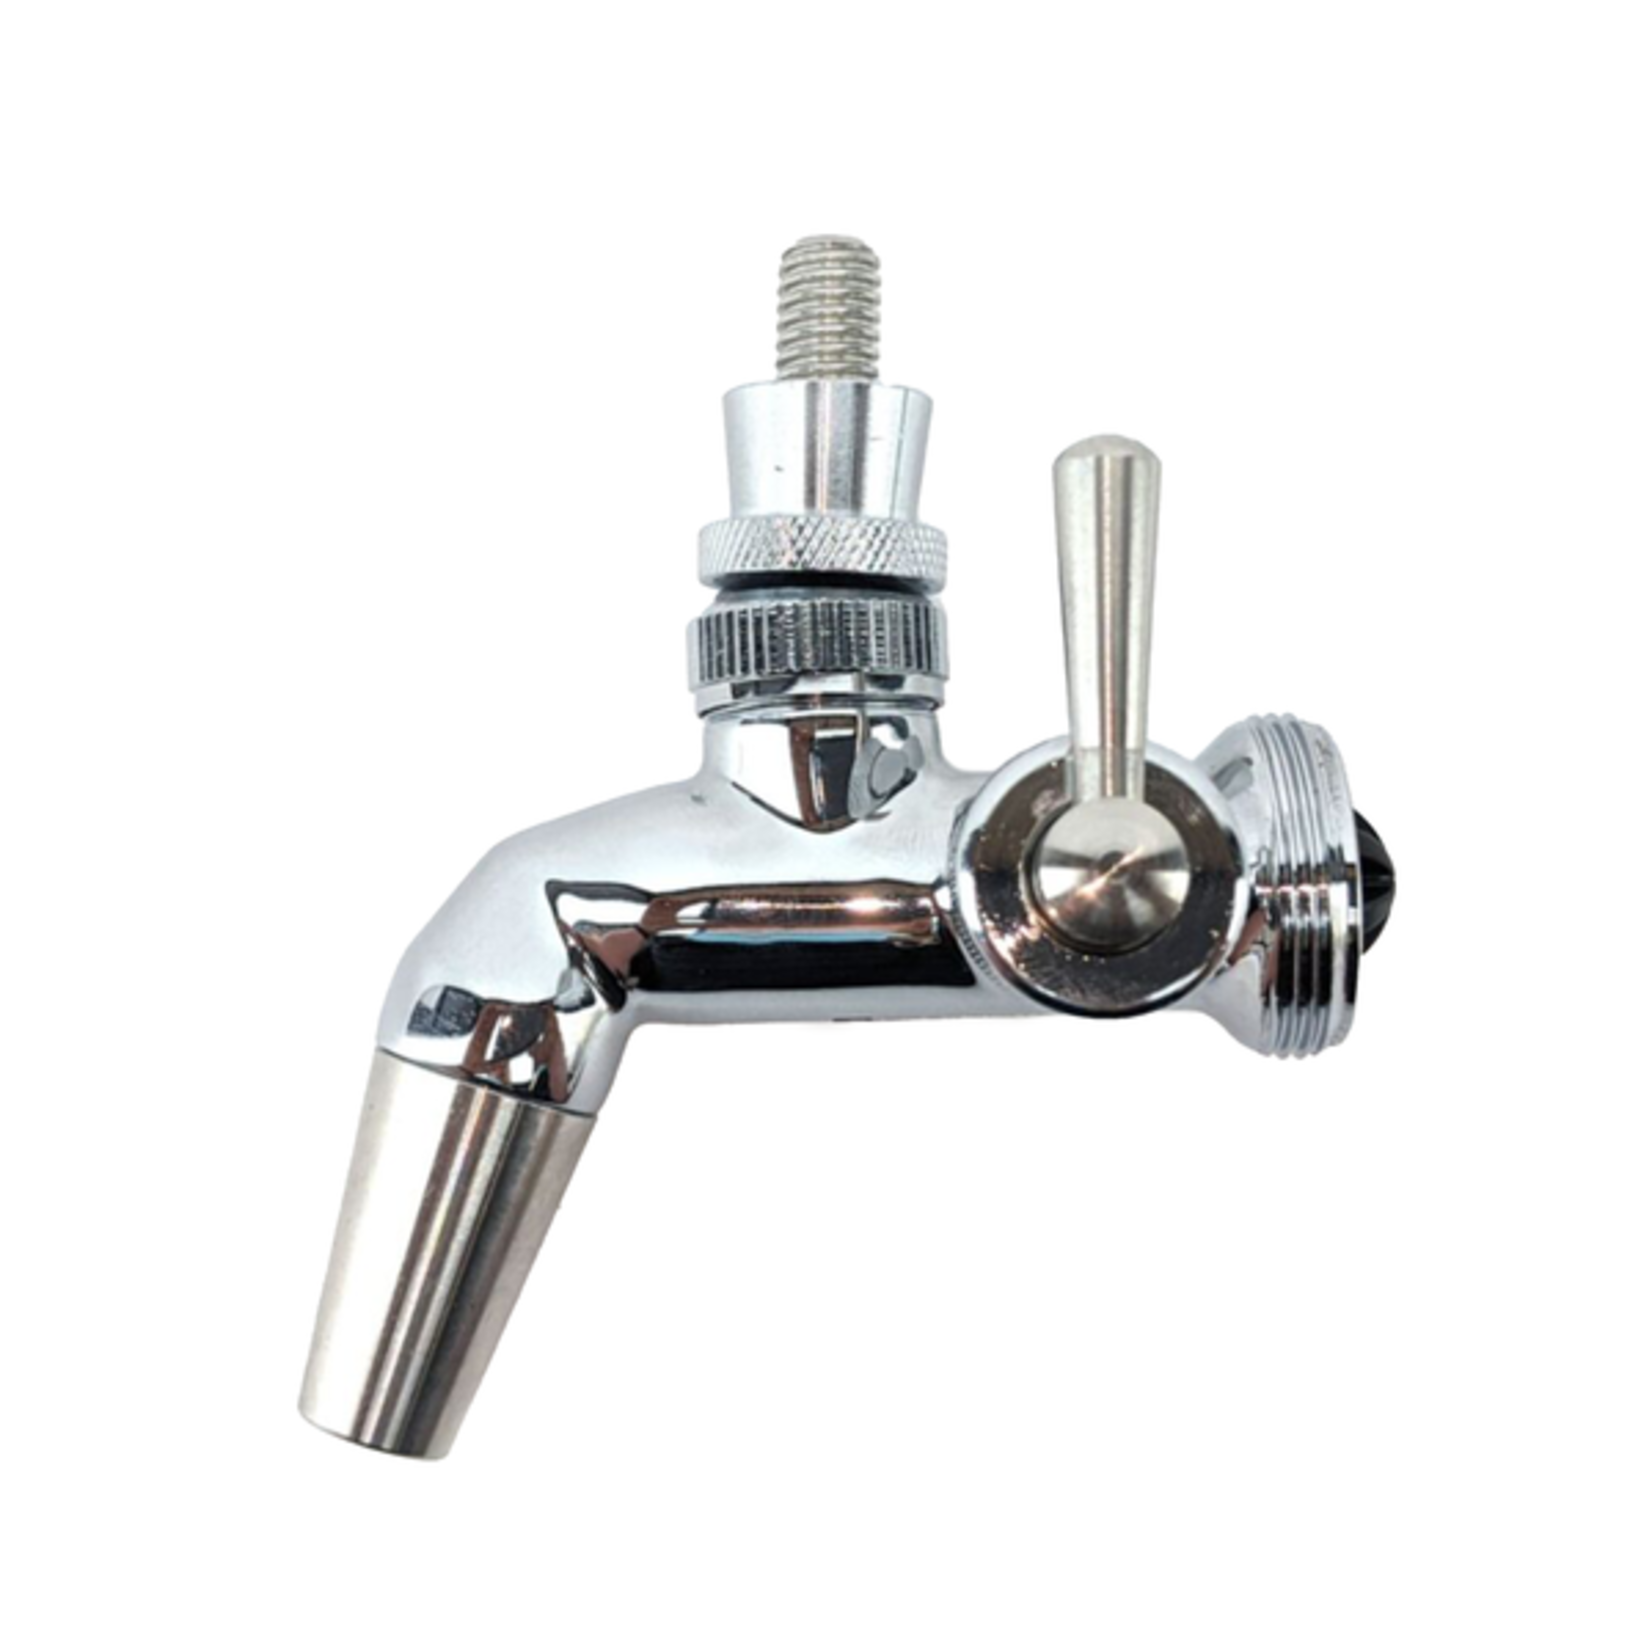 Nukatap Stainless stell flow control faucet